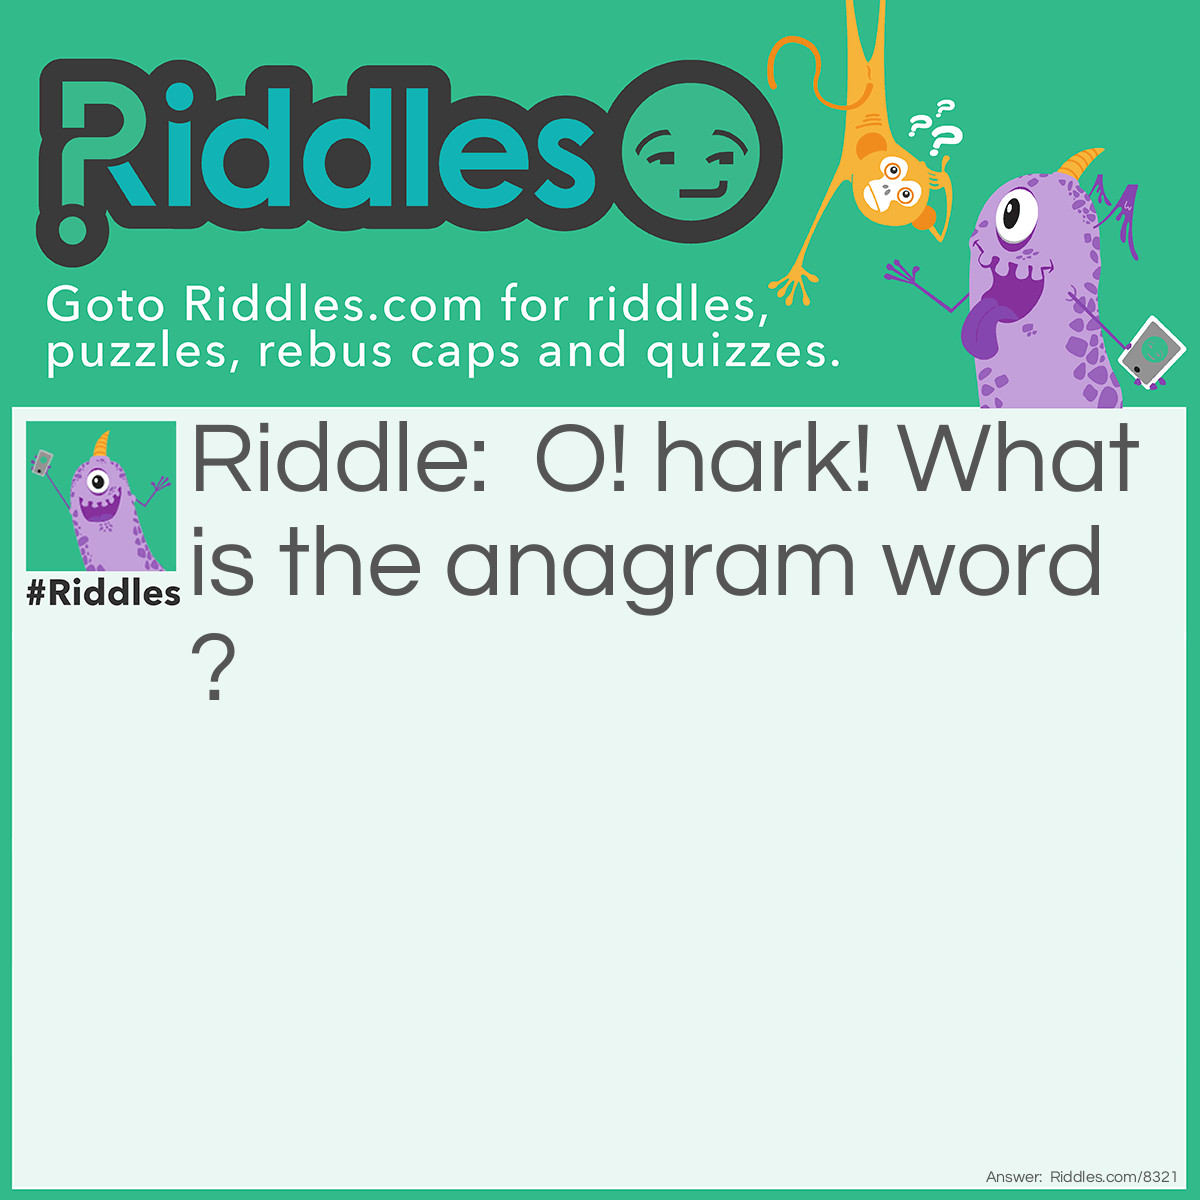 Riddle: O! hark! What is the anagrammed  word? Answer: Korah.